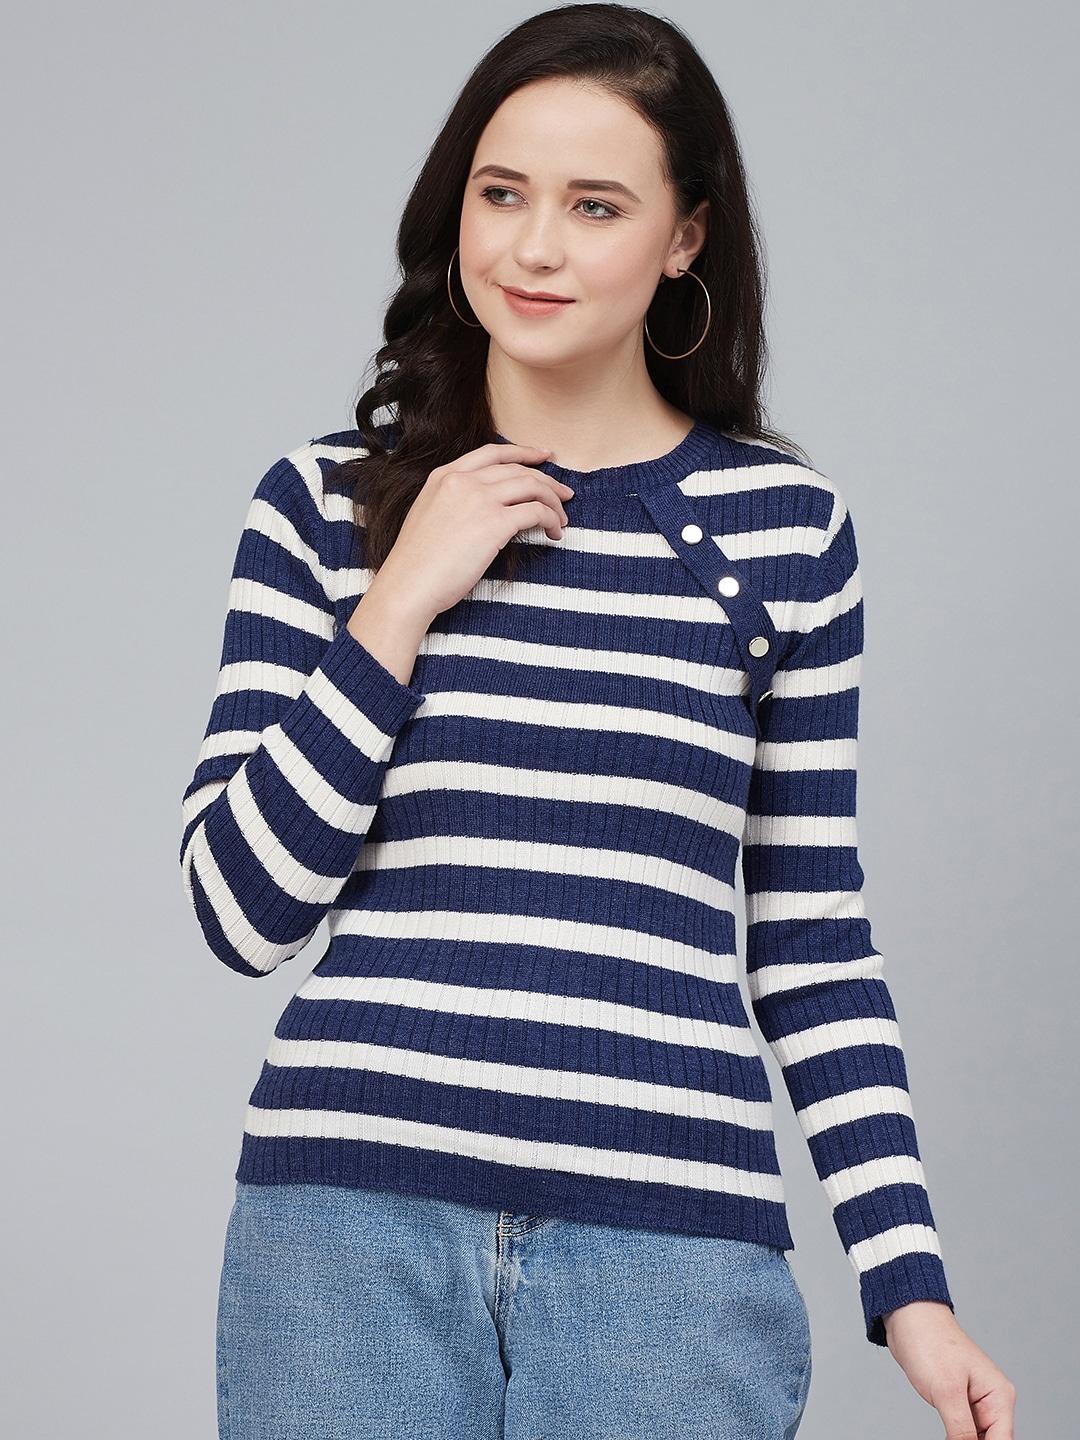 cayman-women-navy-blue-&-white-striped-pullover